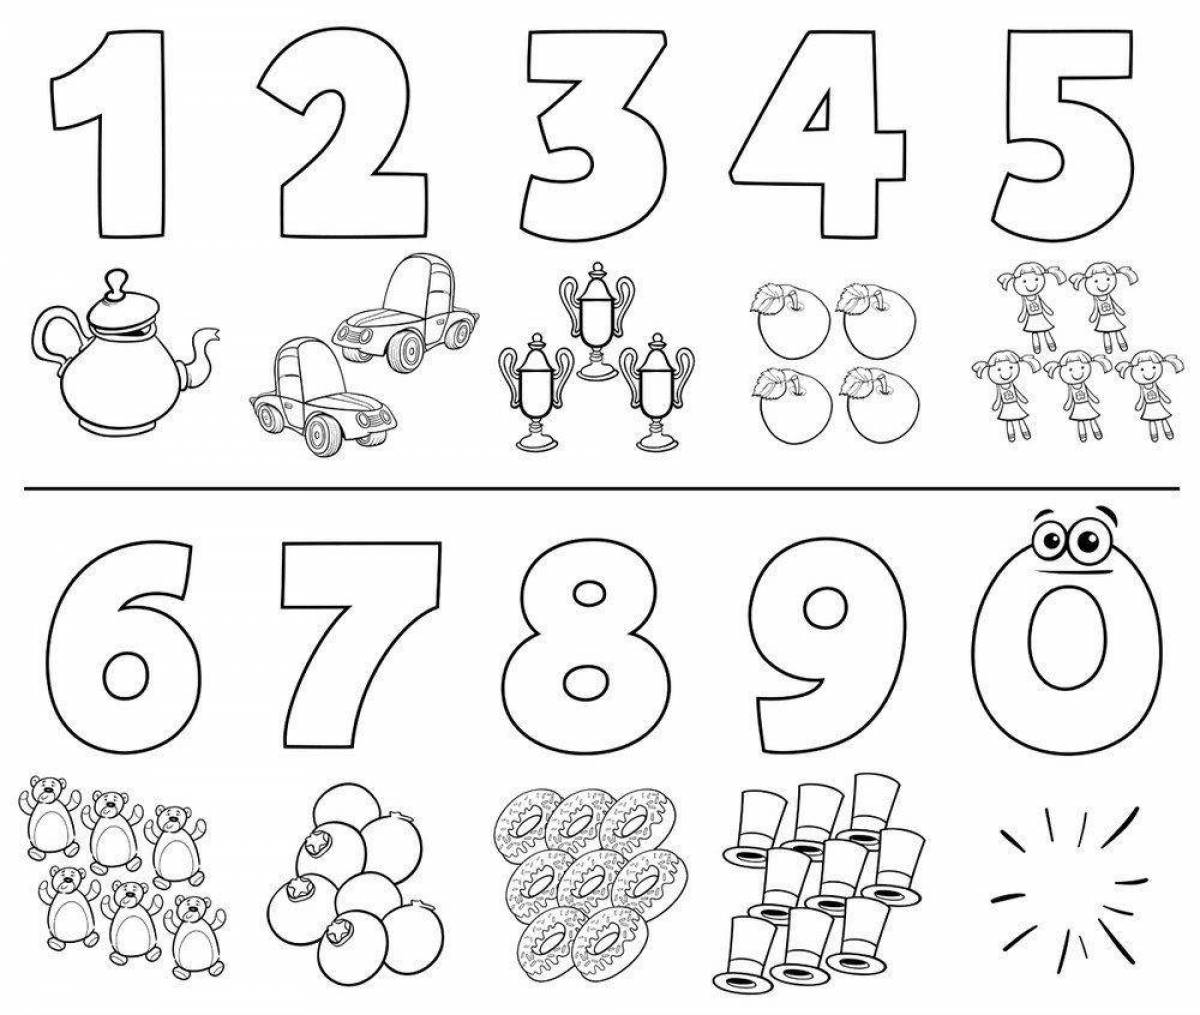 Creative coloring pages with page numbers up to 20